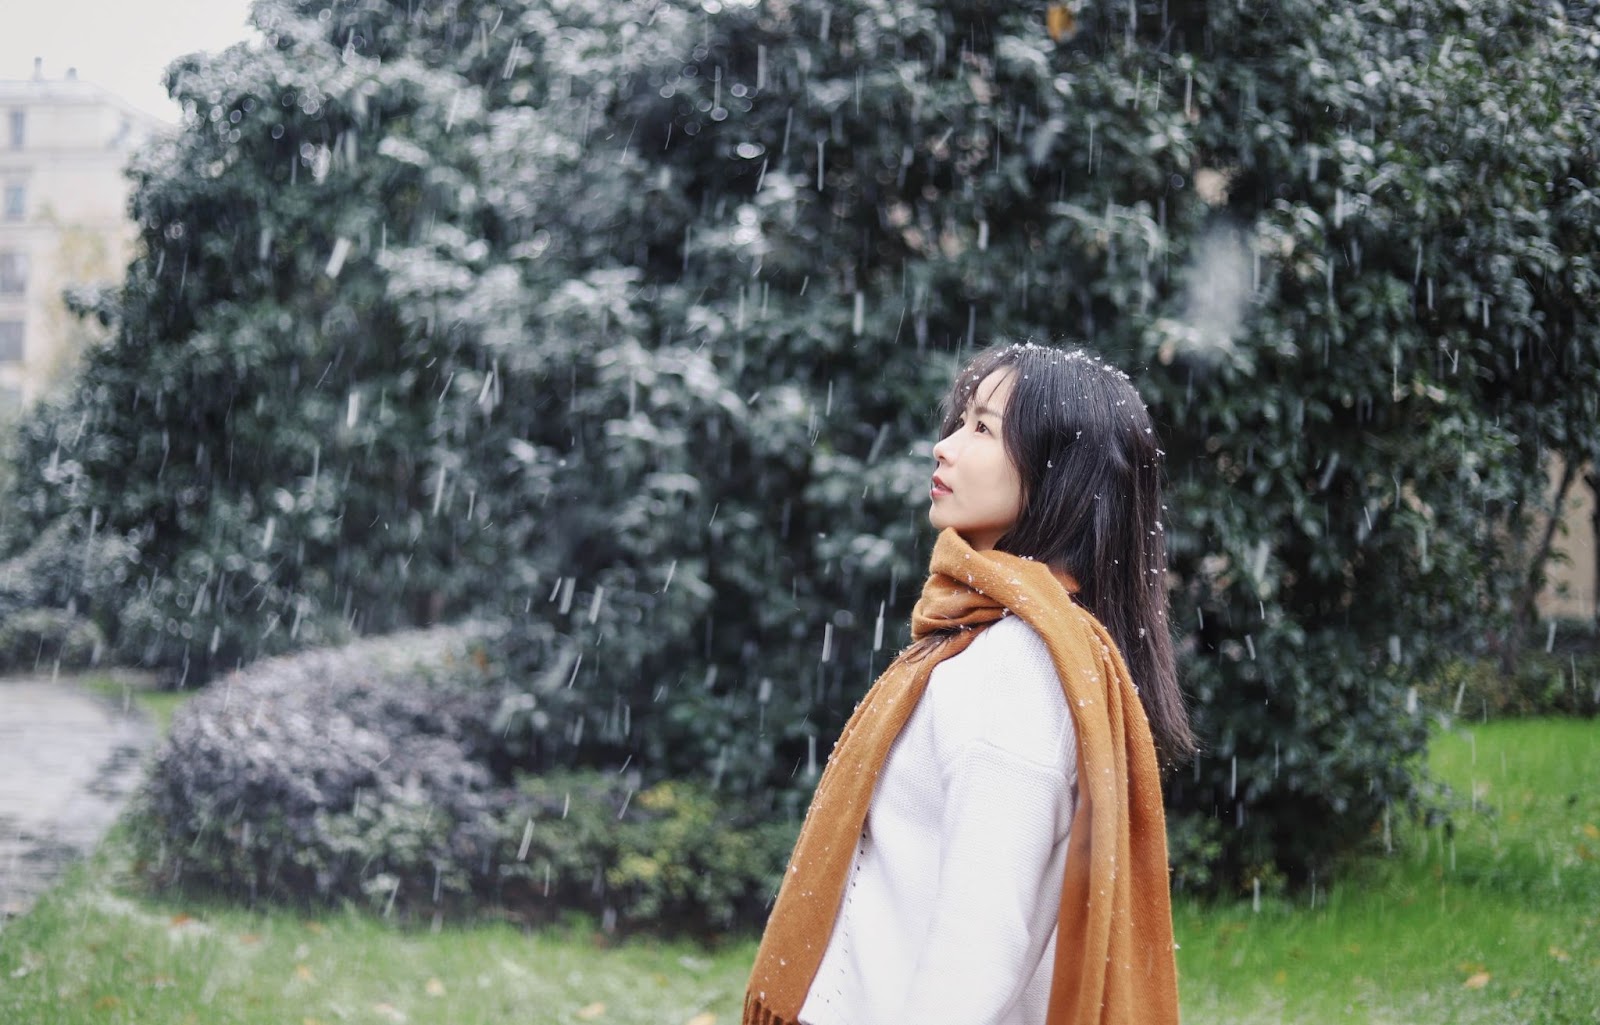 A woman standing in the snow, looking up, wearing a brown scarf